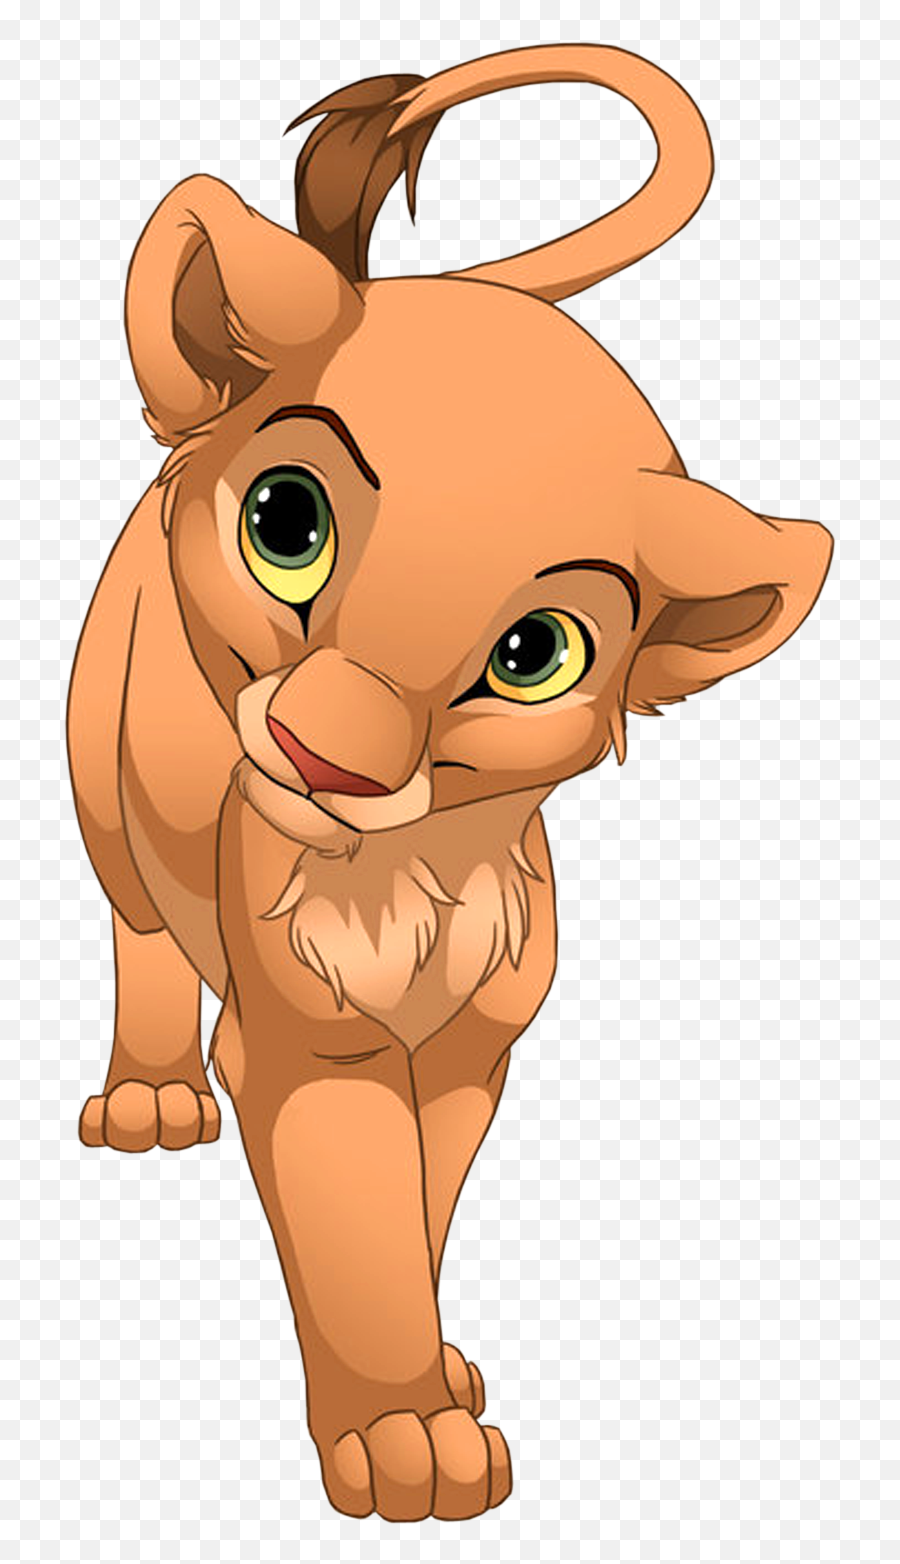 Lion King Images Free Download Posted By Ethan Peltier - Personnage Disney Le Roi Lion Png,The Lion King Png